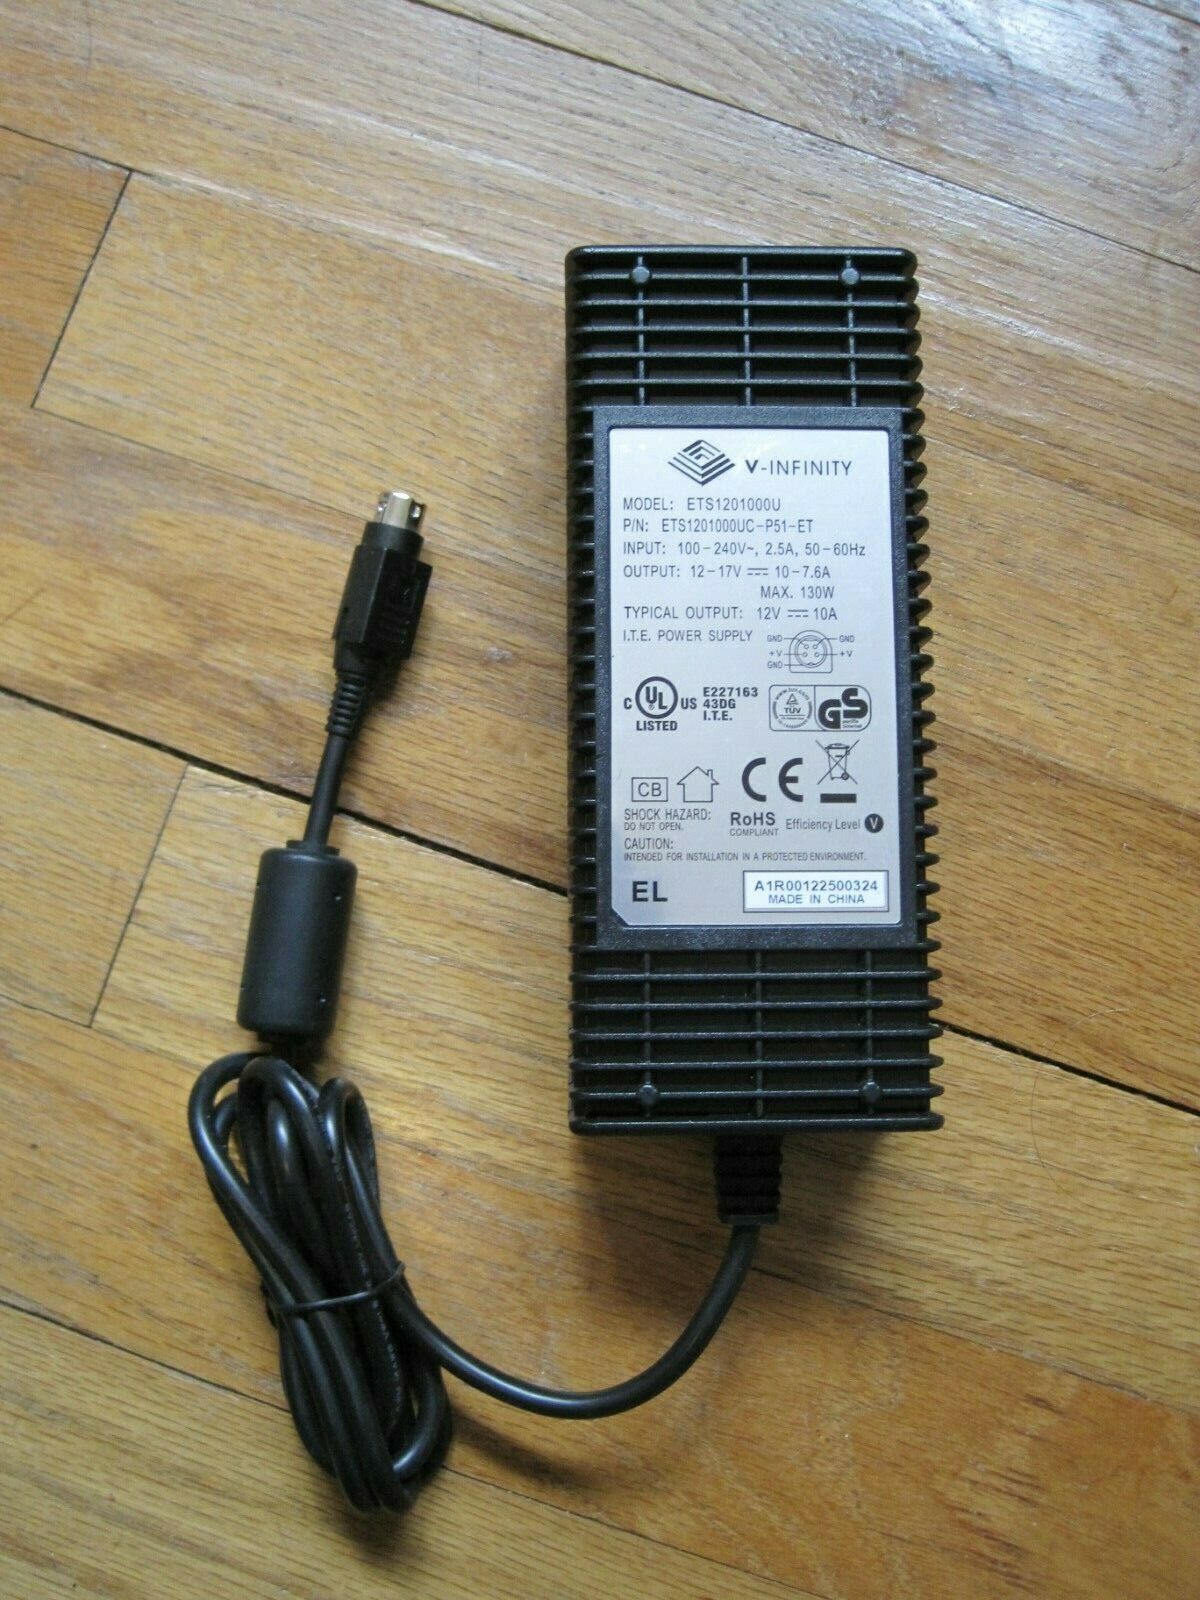 New 12V 10A V-Infinity ETS1201000U Power Supply Adapter ETS1201000UC-P51-ET POEWR CHARGER 4pin